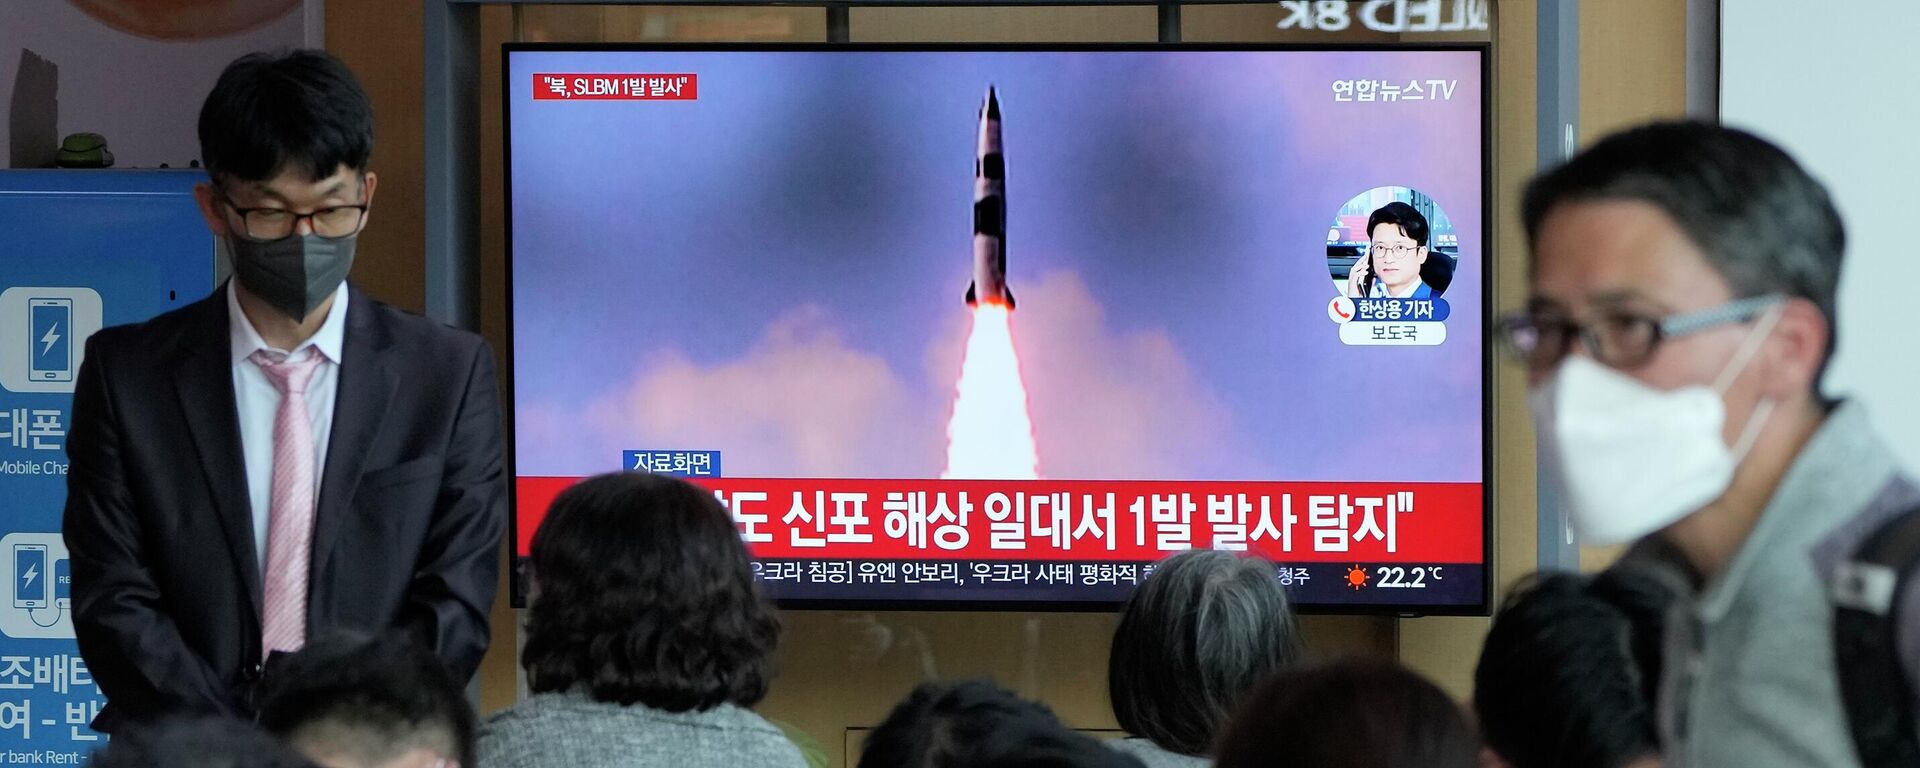 People watch a TV showing a file image of North Korea's missile launch during a news program at the Seoul Railway Station in Seoul, South Korea, Saturday, May 7, 2022. - Sputnik International, 1920, 05.06.2022